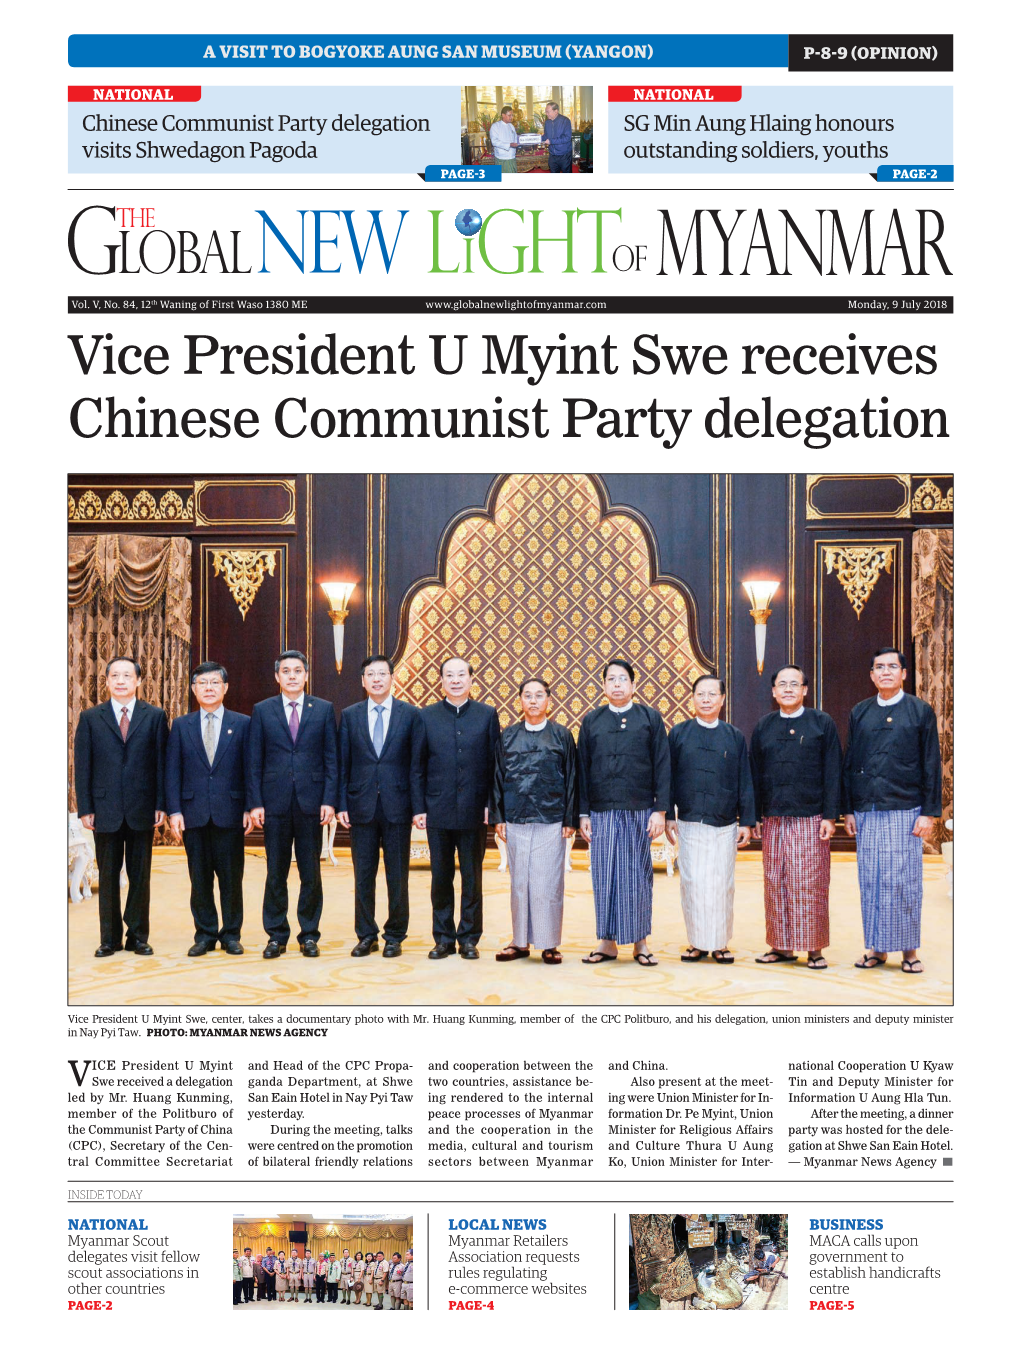 Vice President U Myint Swe Receives Chinese Communist Party Delegation